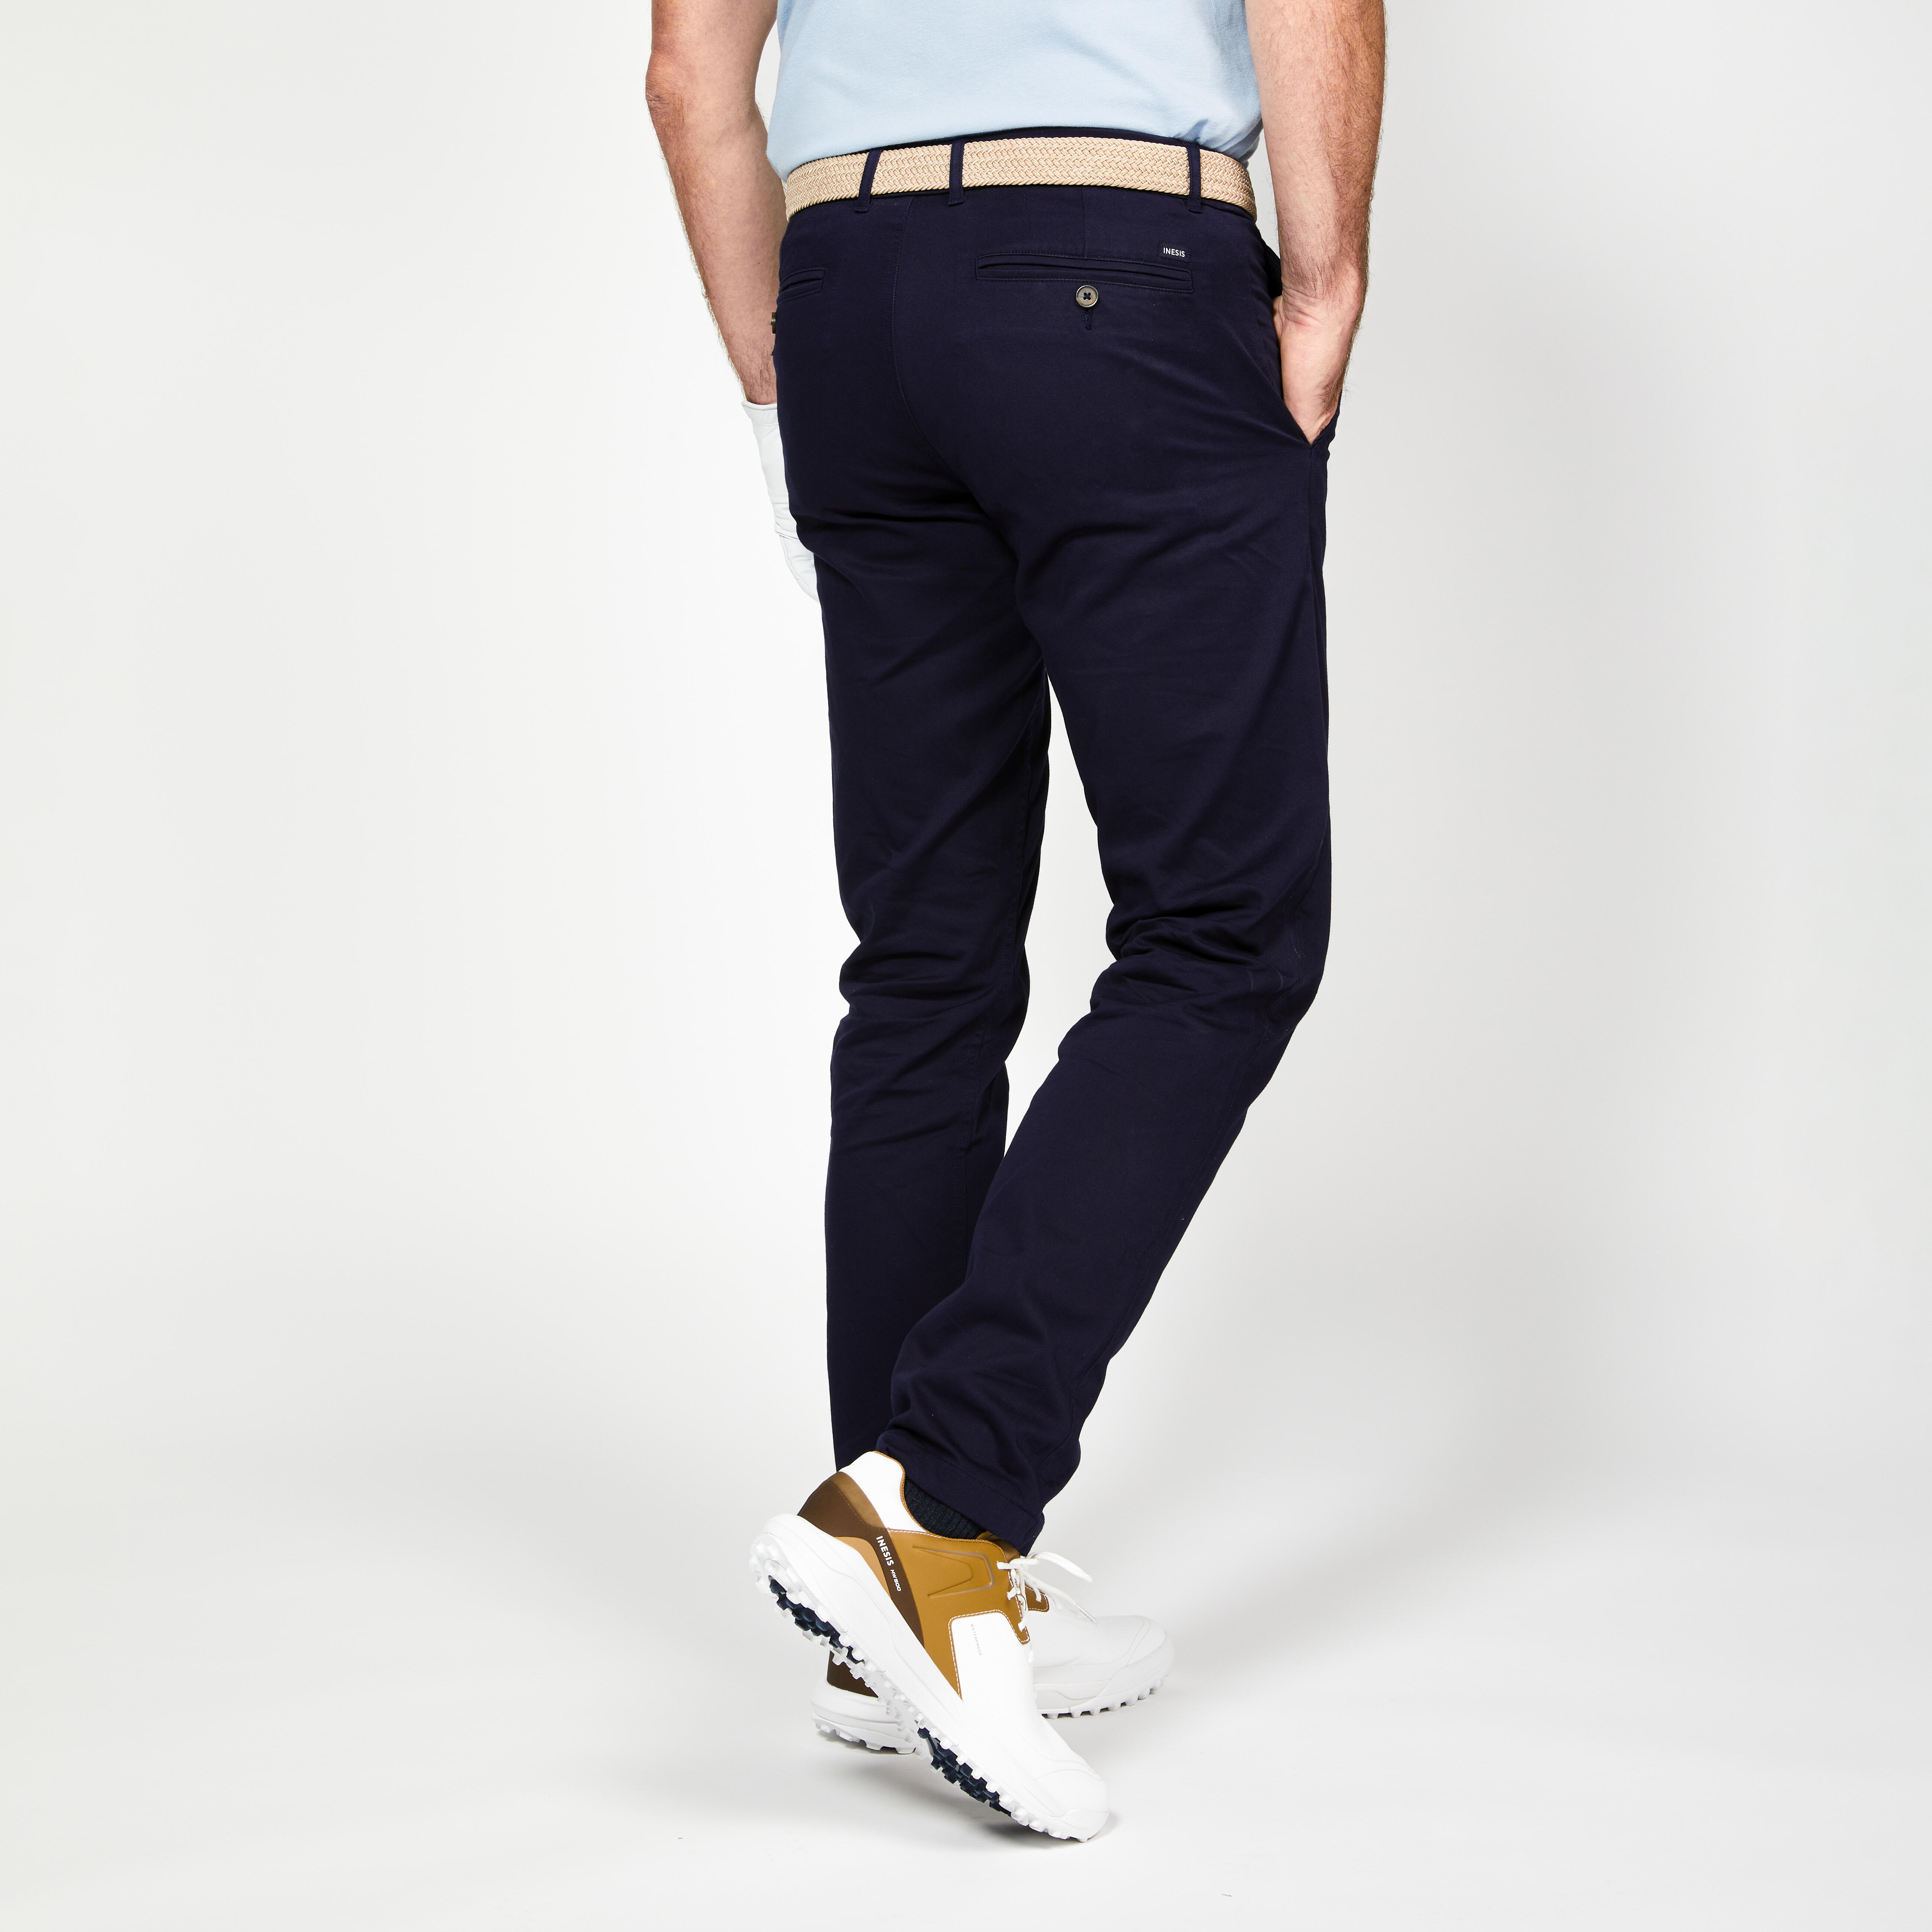 Best golf pants for on-course style and comfort